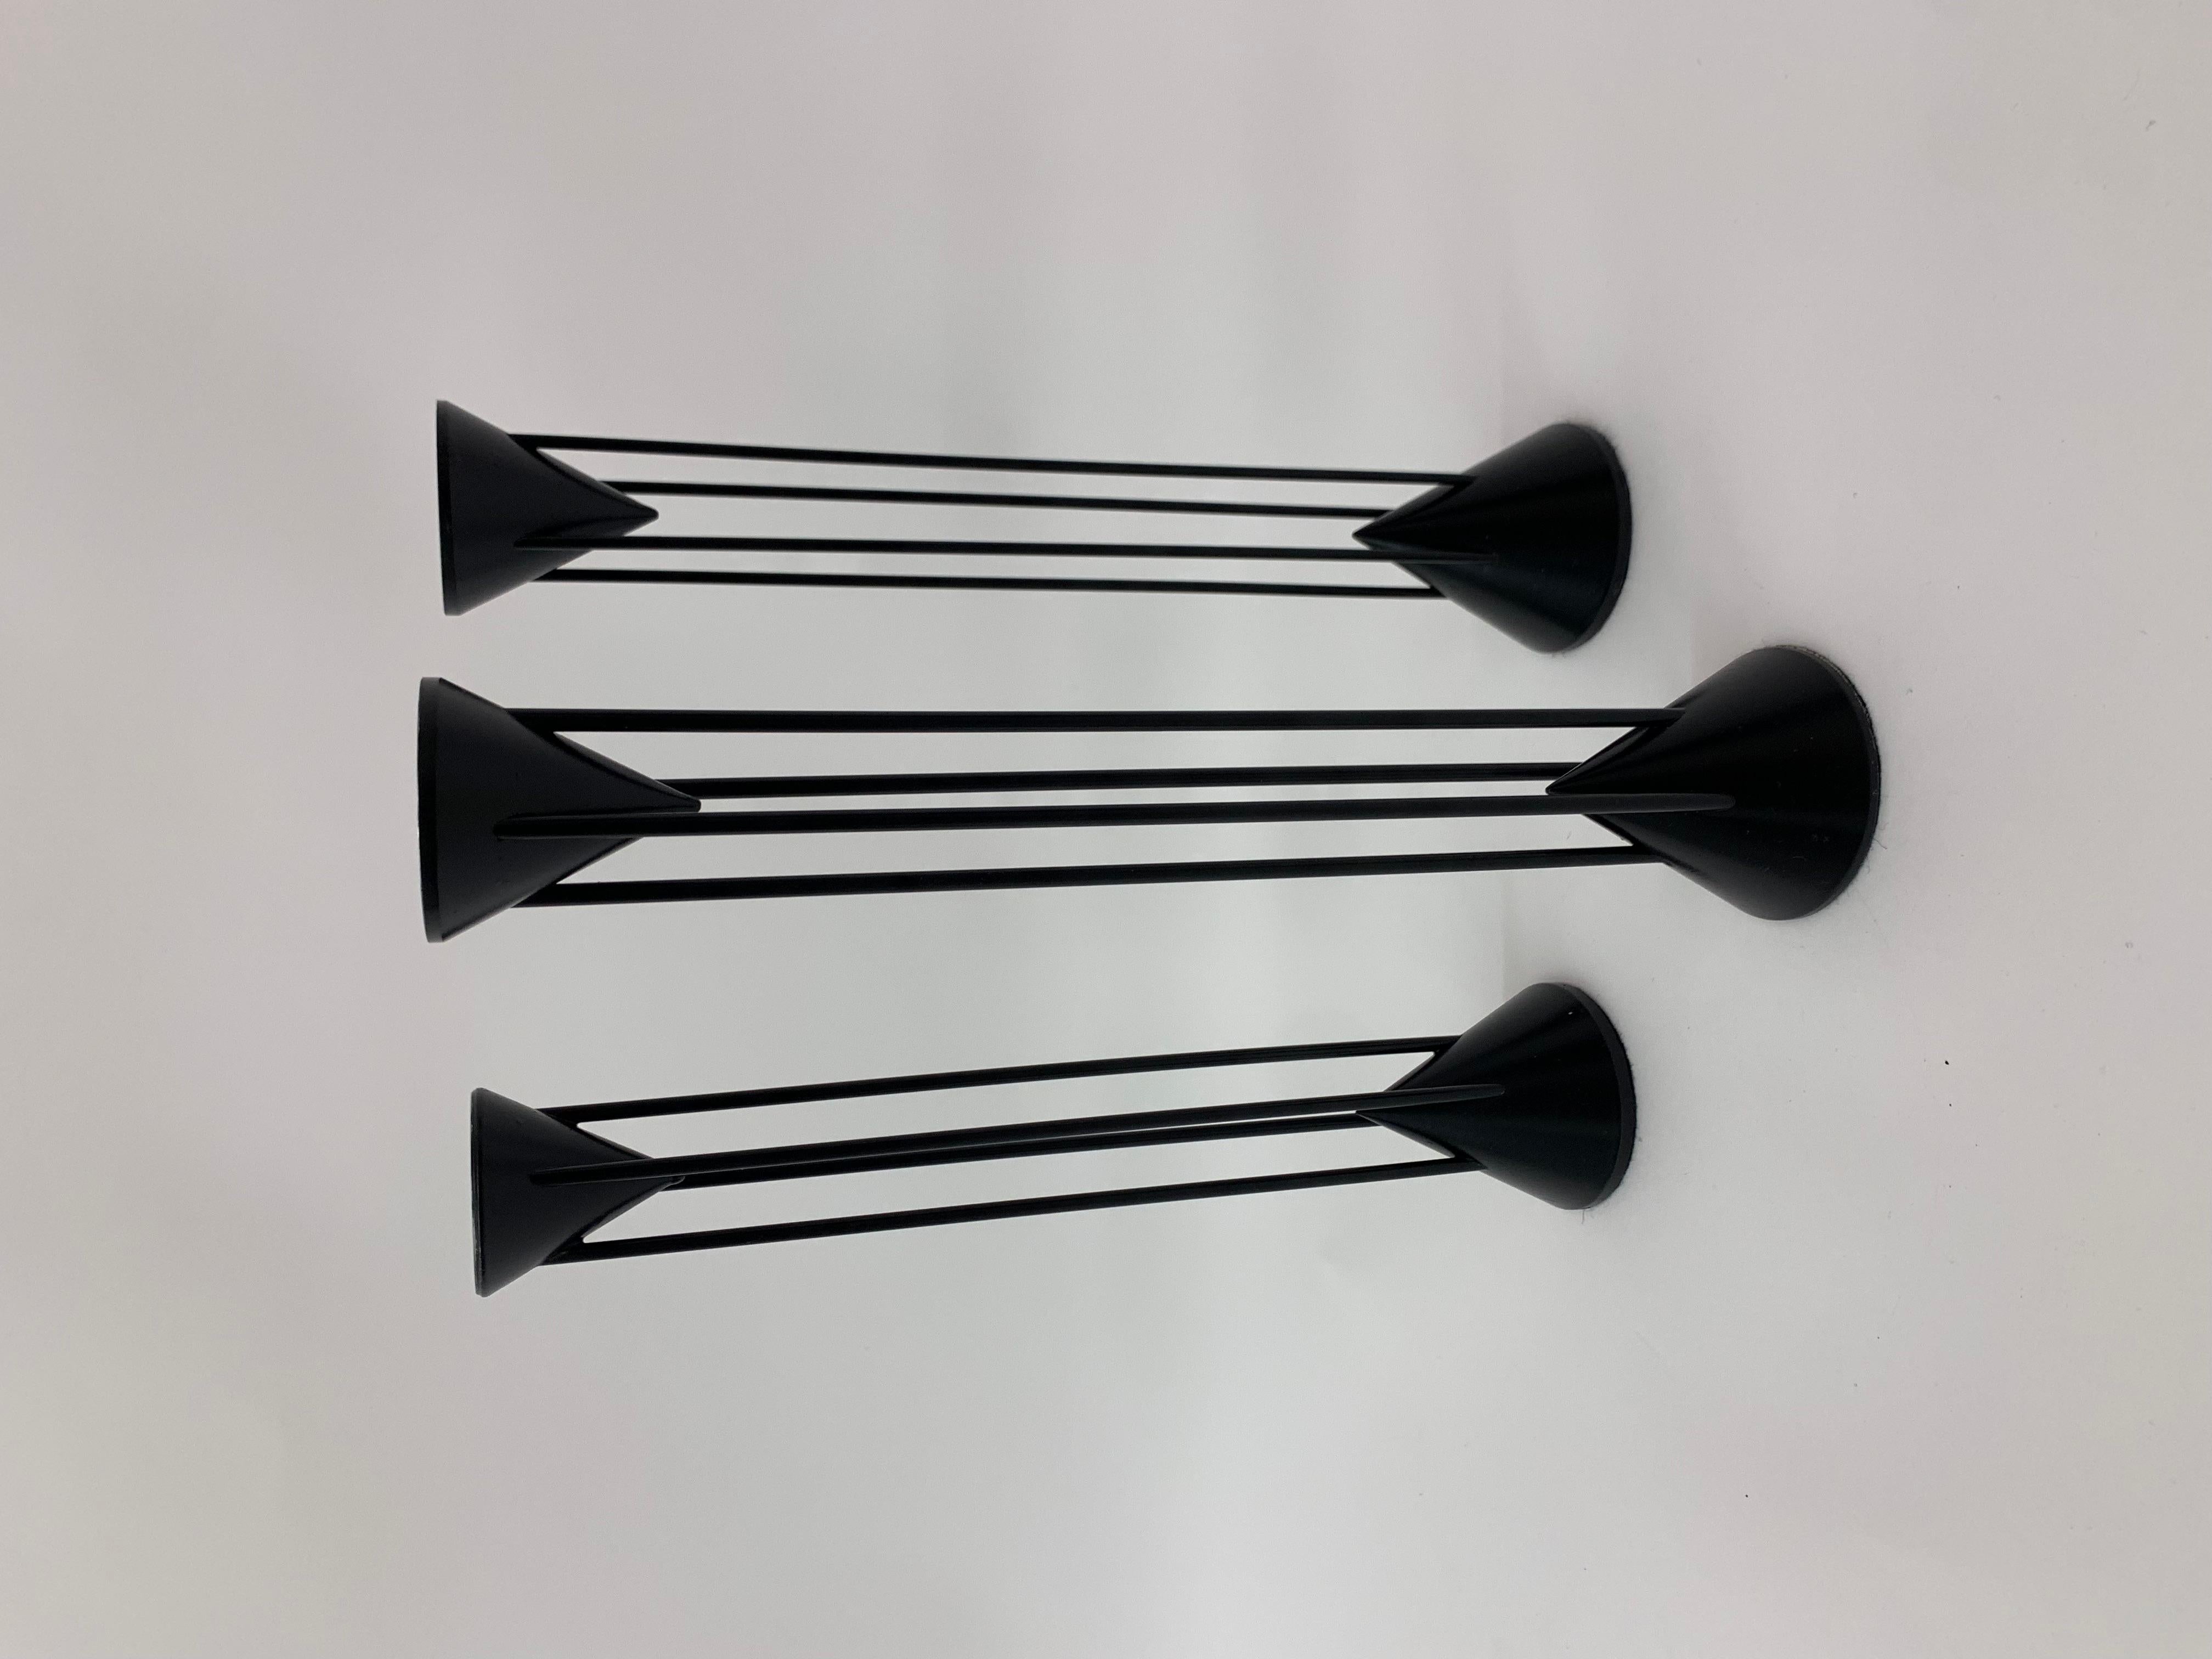 Set of 3 Post-Modern Memphis Candle Sticks by Markus Borgens, 1980s For Sale 1